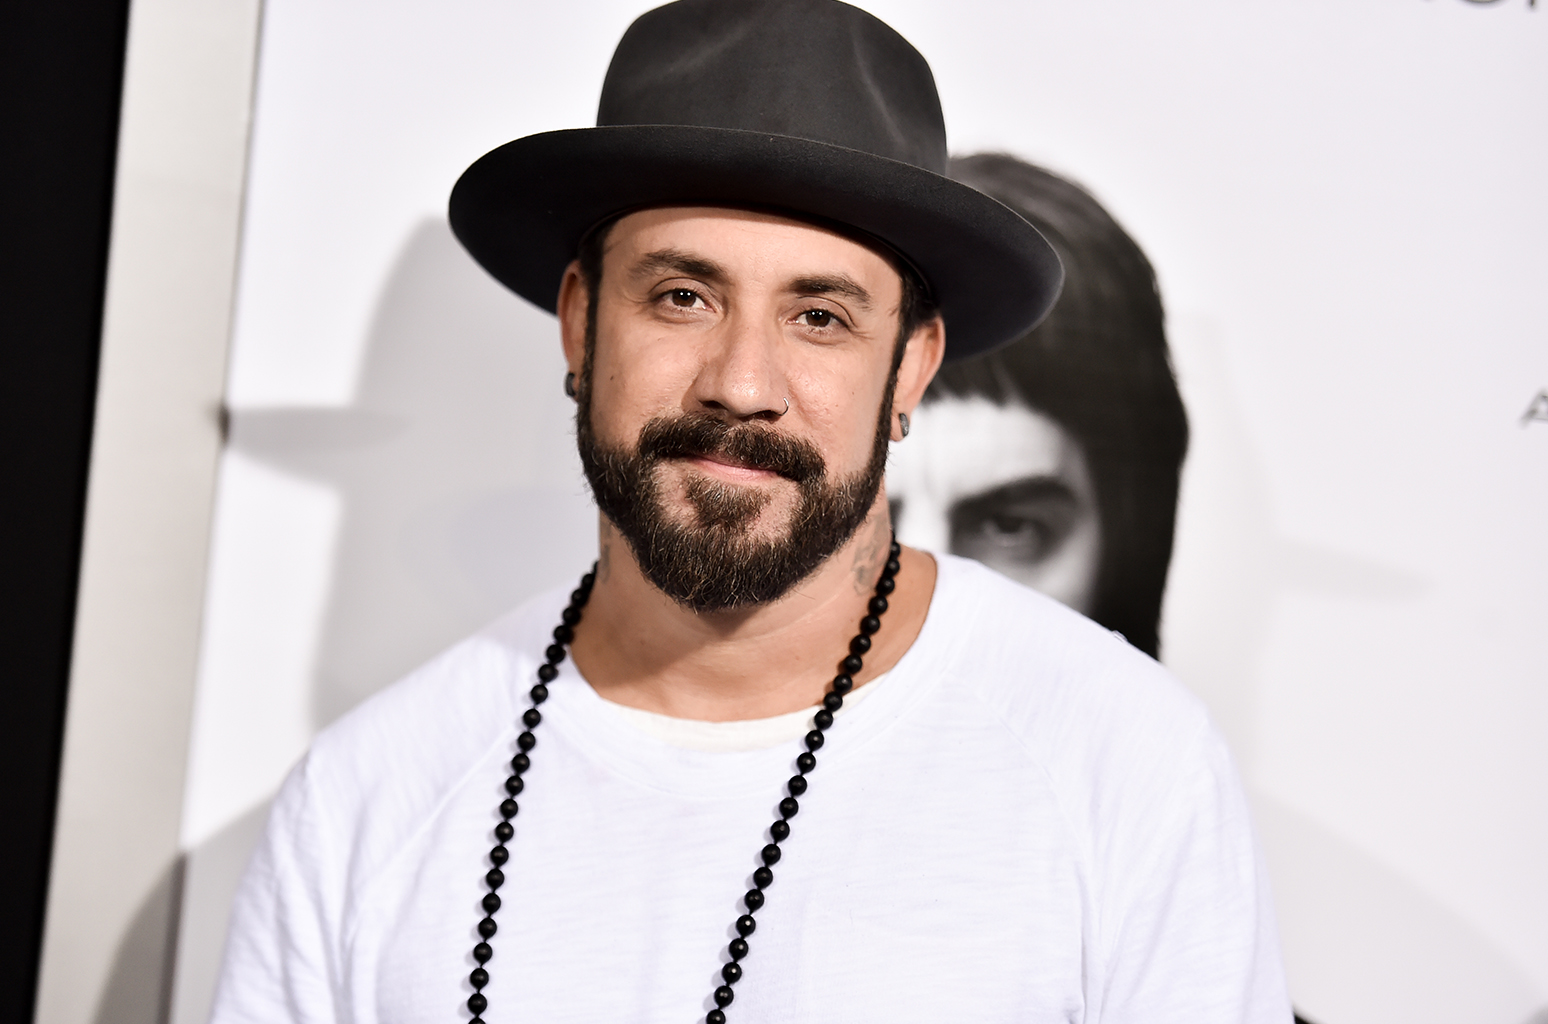 How Close to 20/20 Can You Score on This General Knowledge Quiz? A. J. McLean